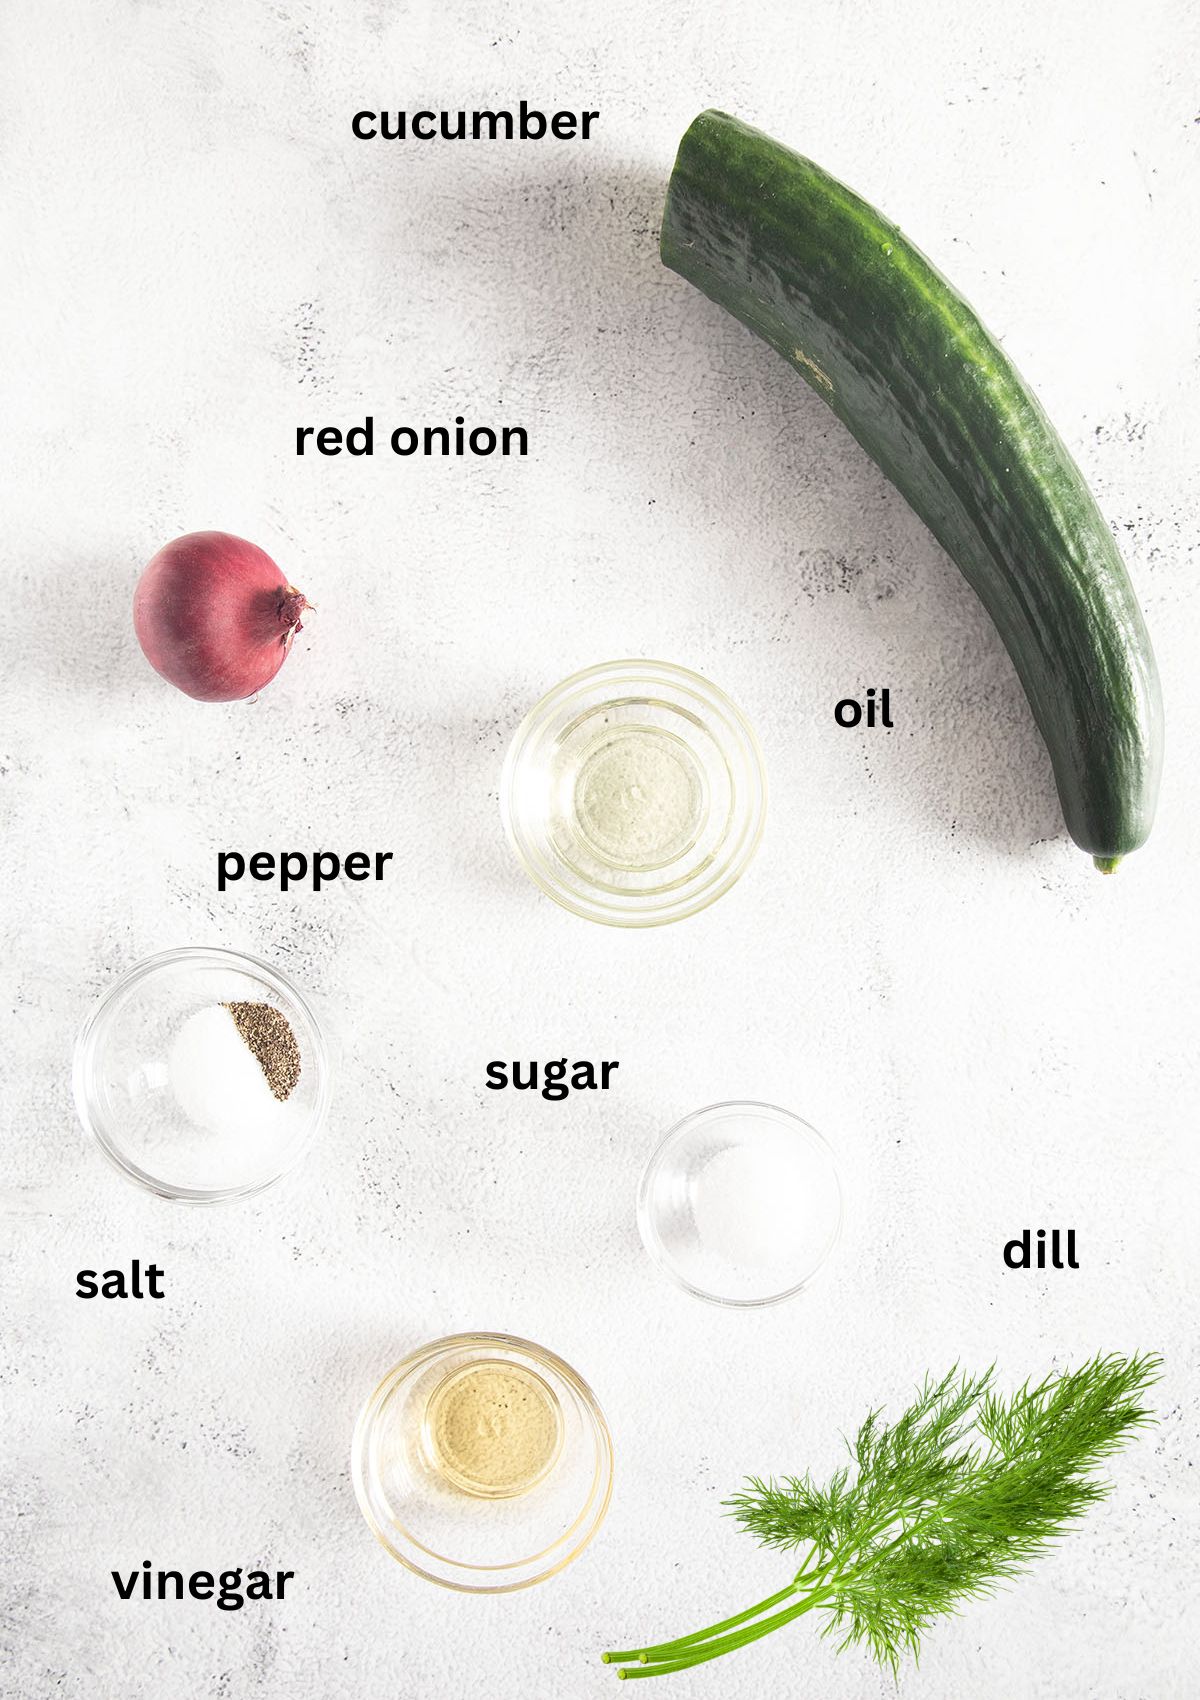 labeled ingredients for making cucumber salad.